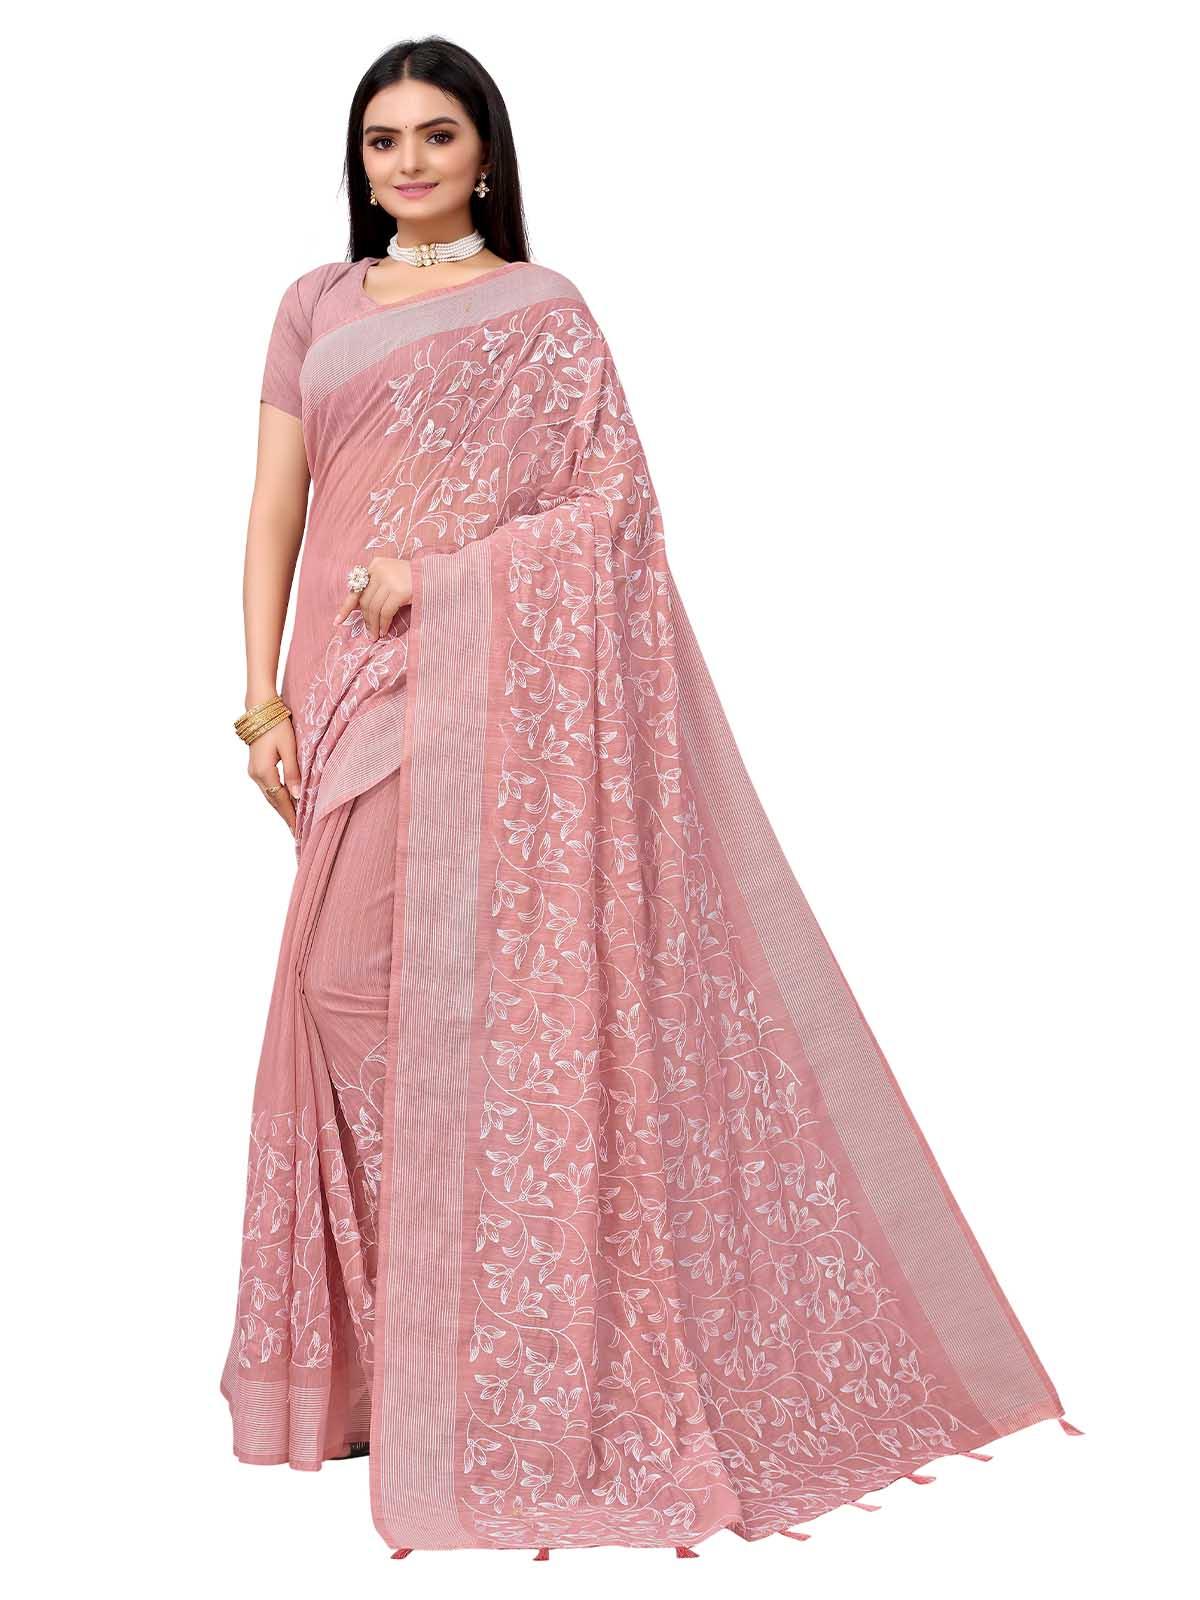 Women's Pink Pure Cotton Embroidered Saree With Blouse - Odette